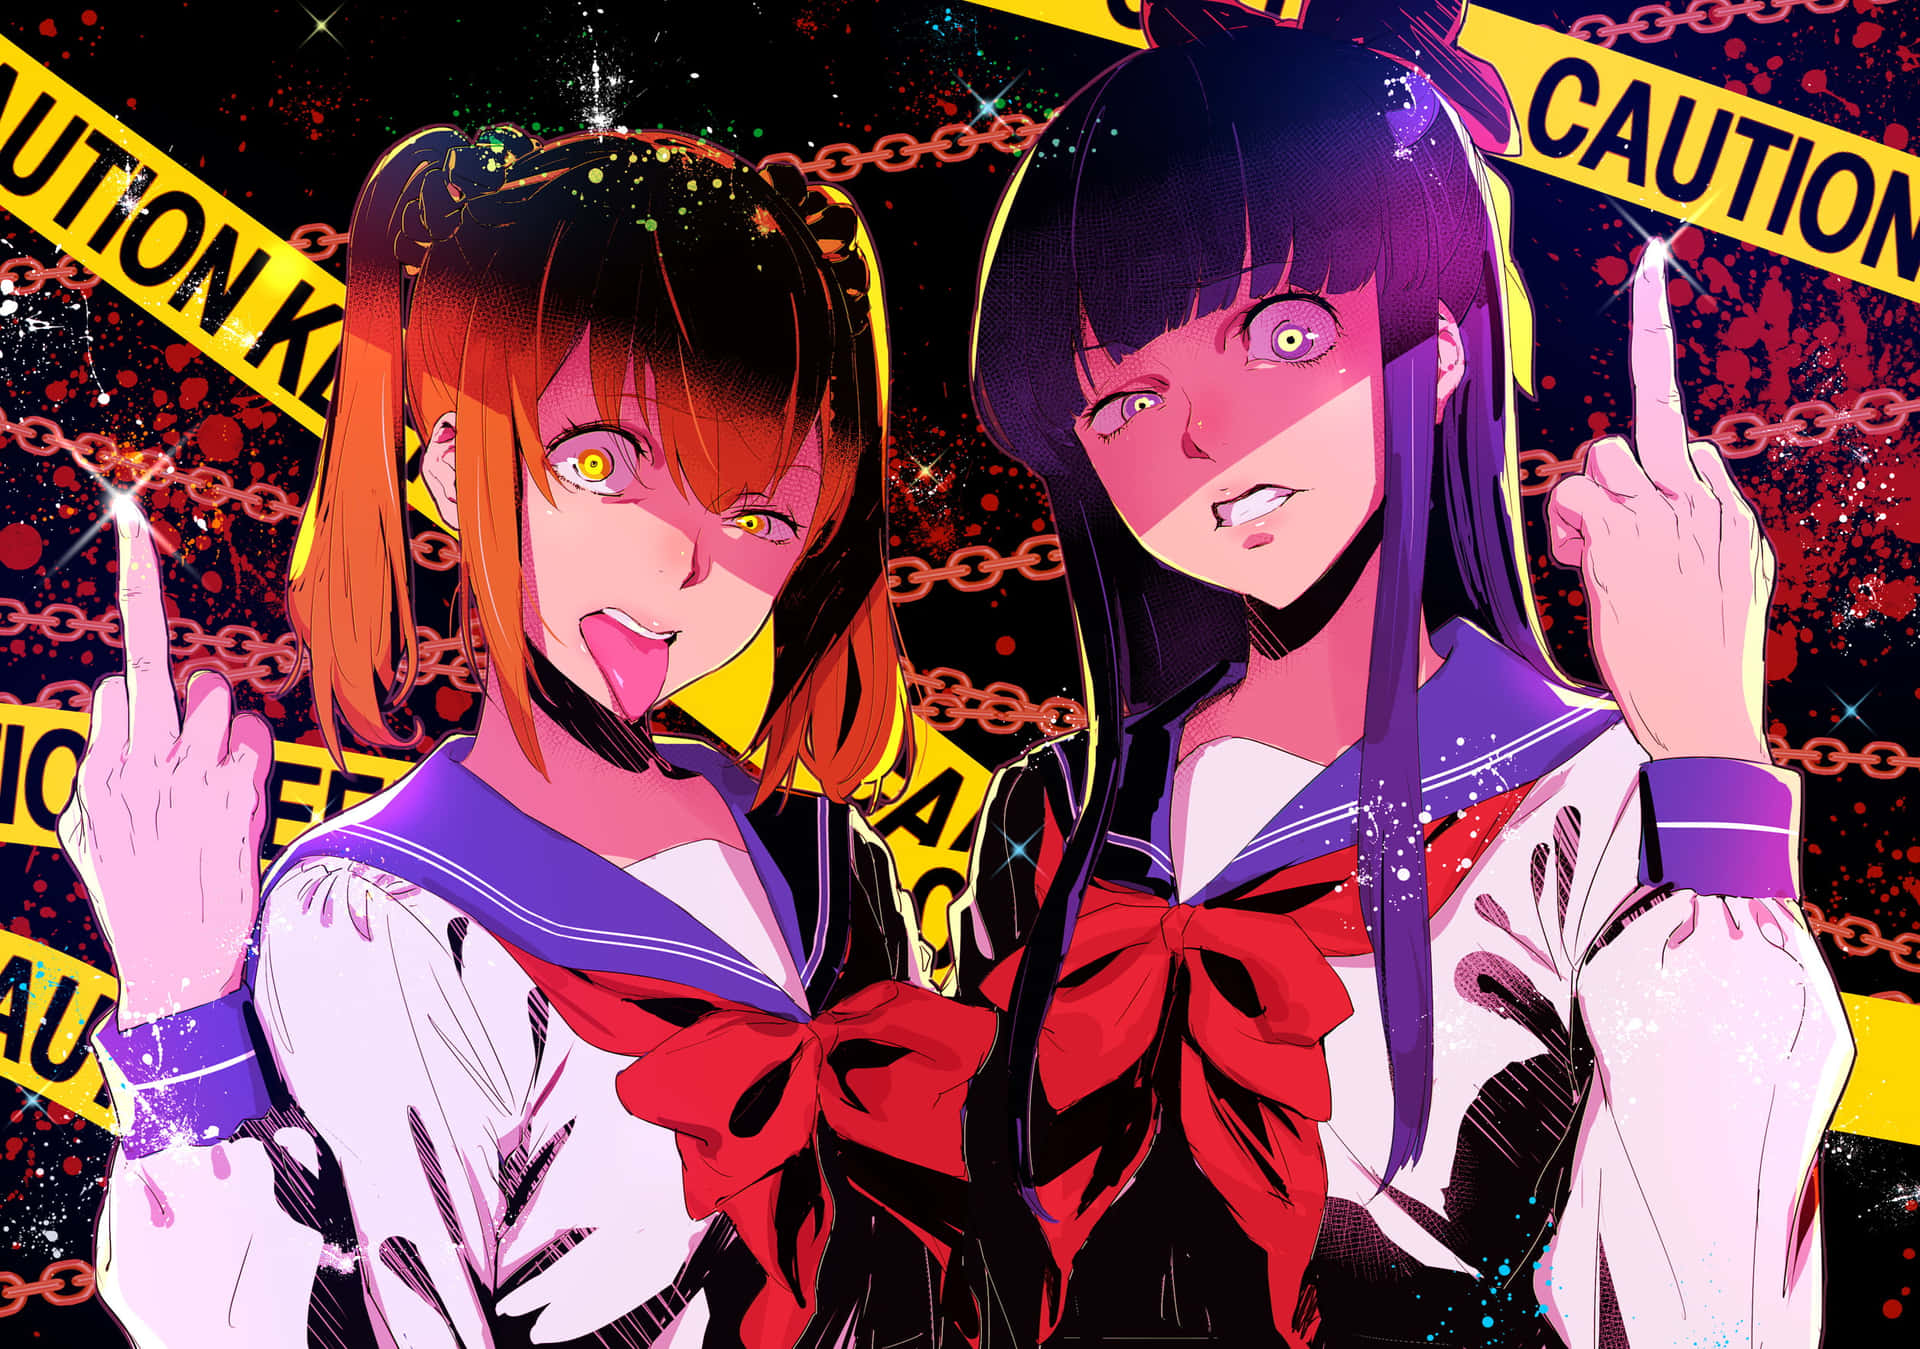 Two Anime Girls Standing In Front Of Caution Tape Background